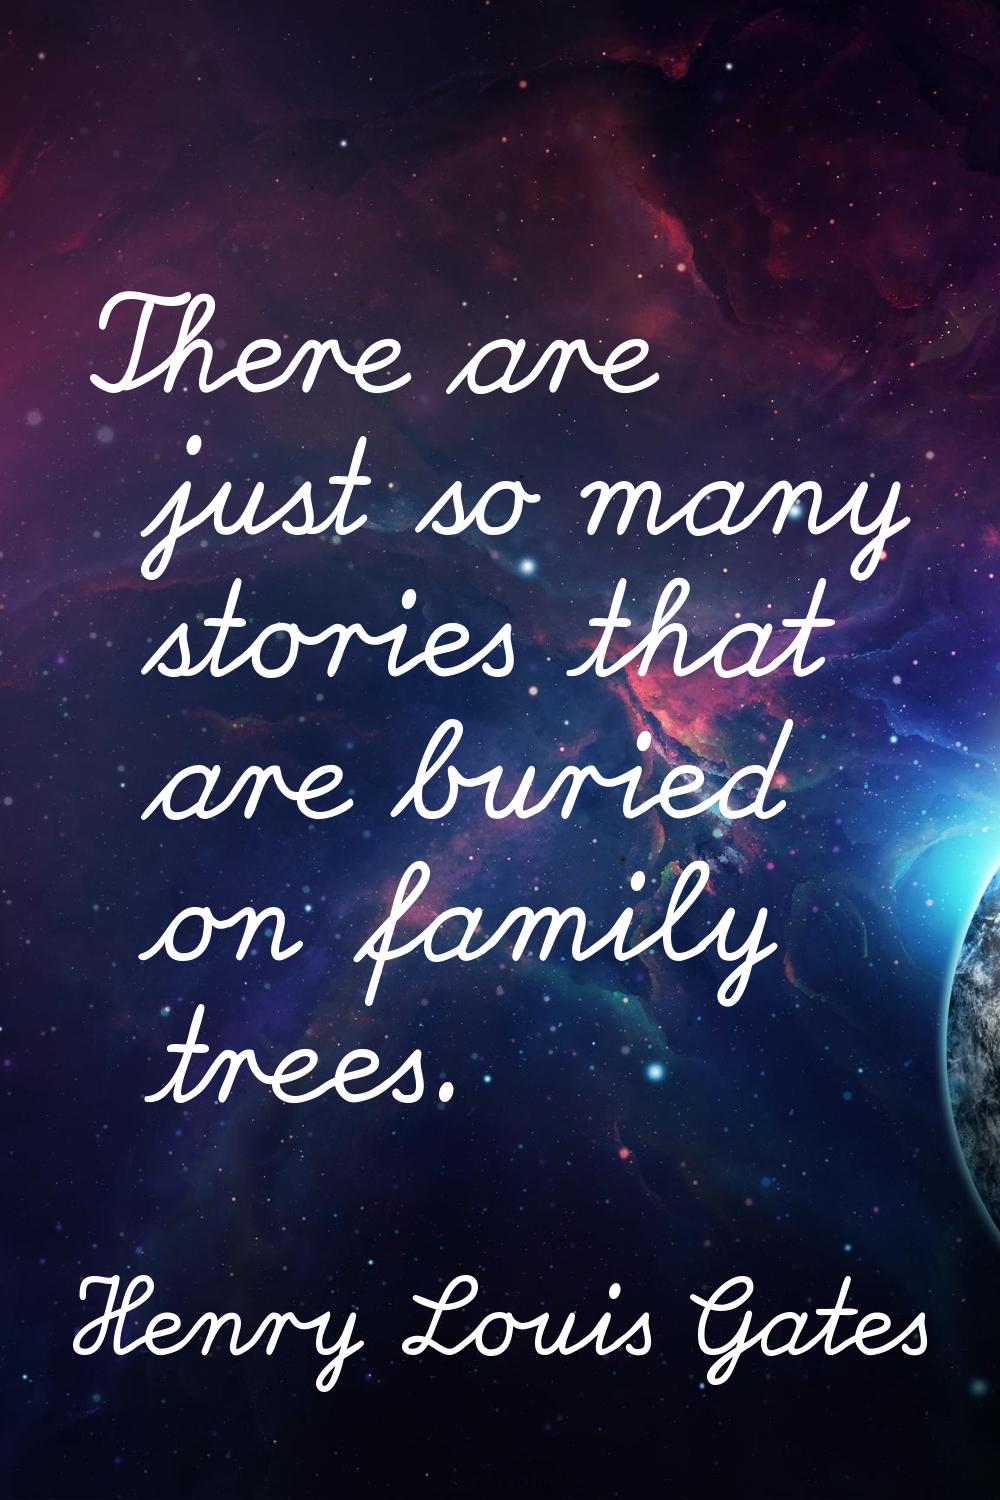 There are just so many stories that are buried on family trees.